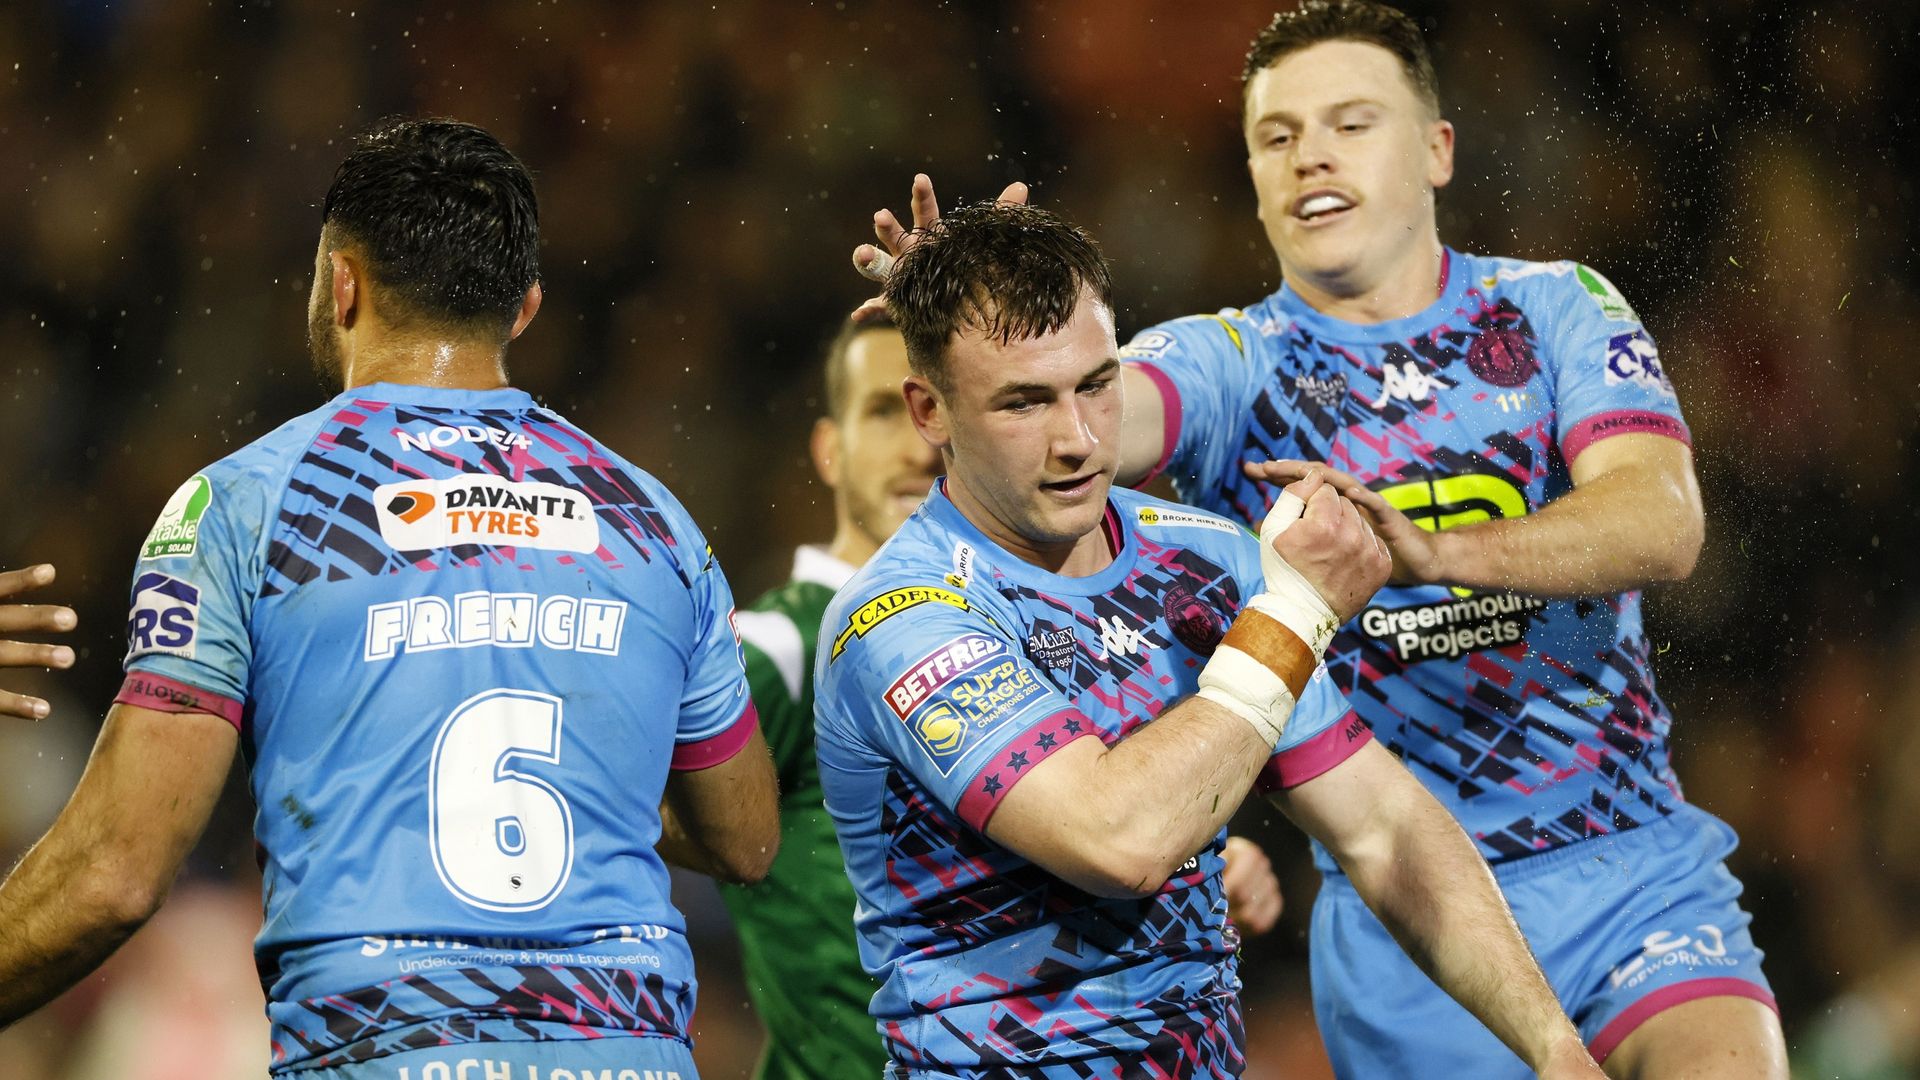 Wigan rout Leigh to take 'Battle of the Borough' victory